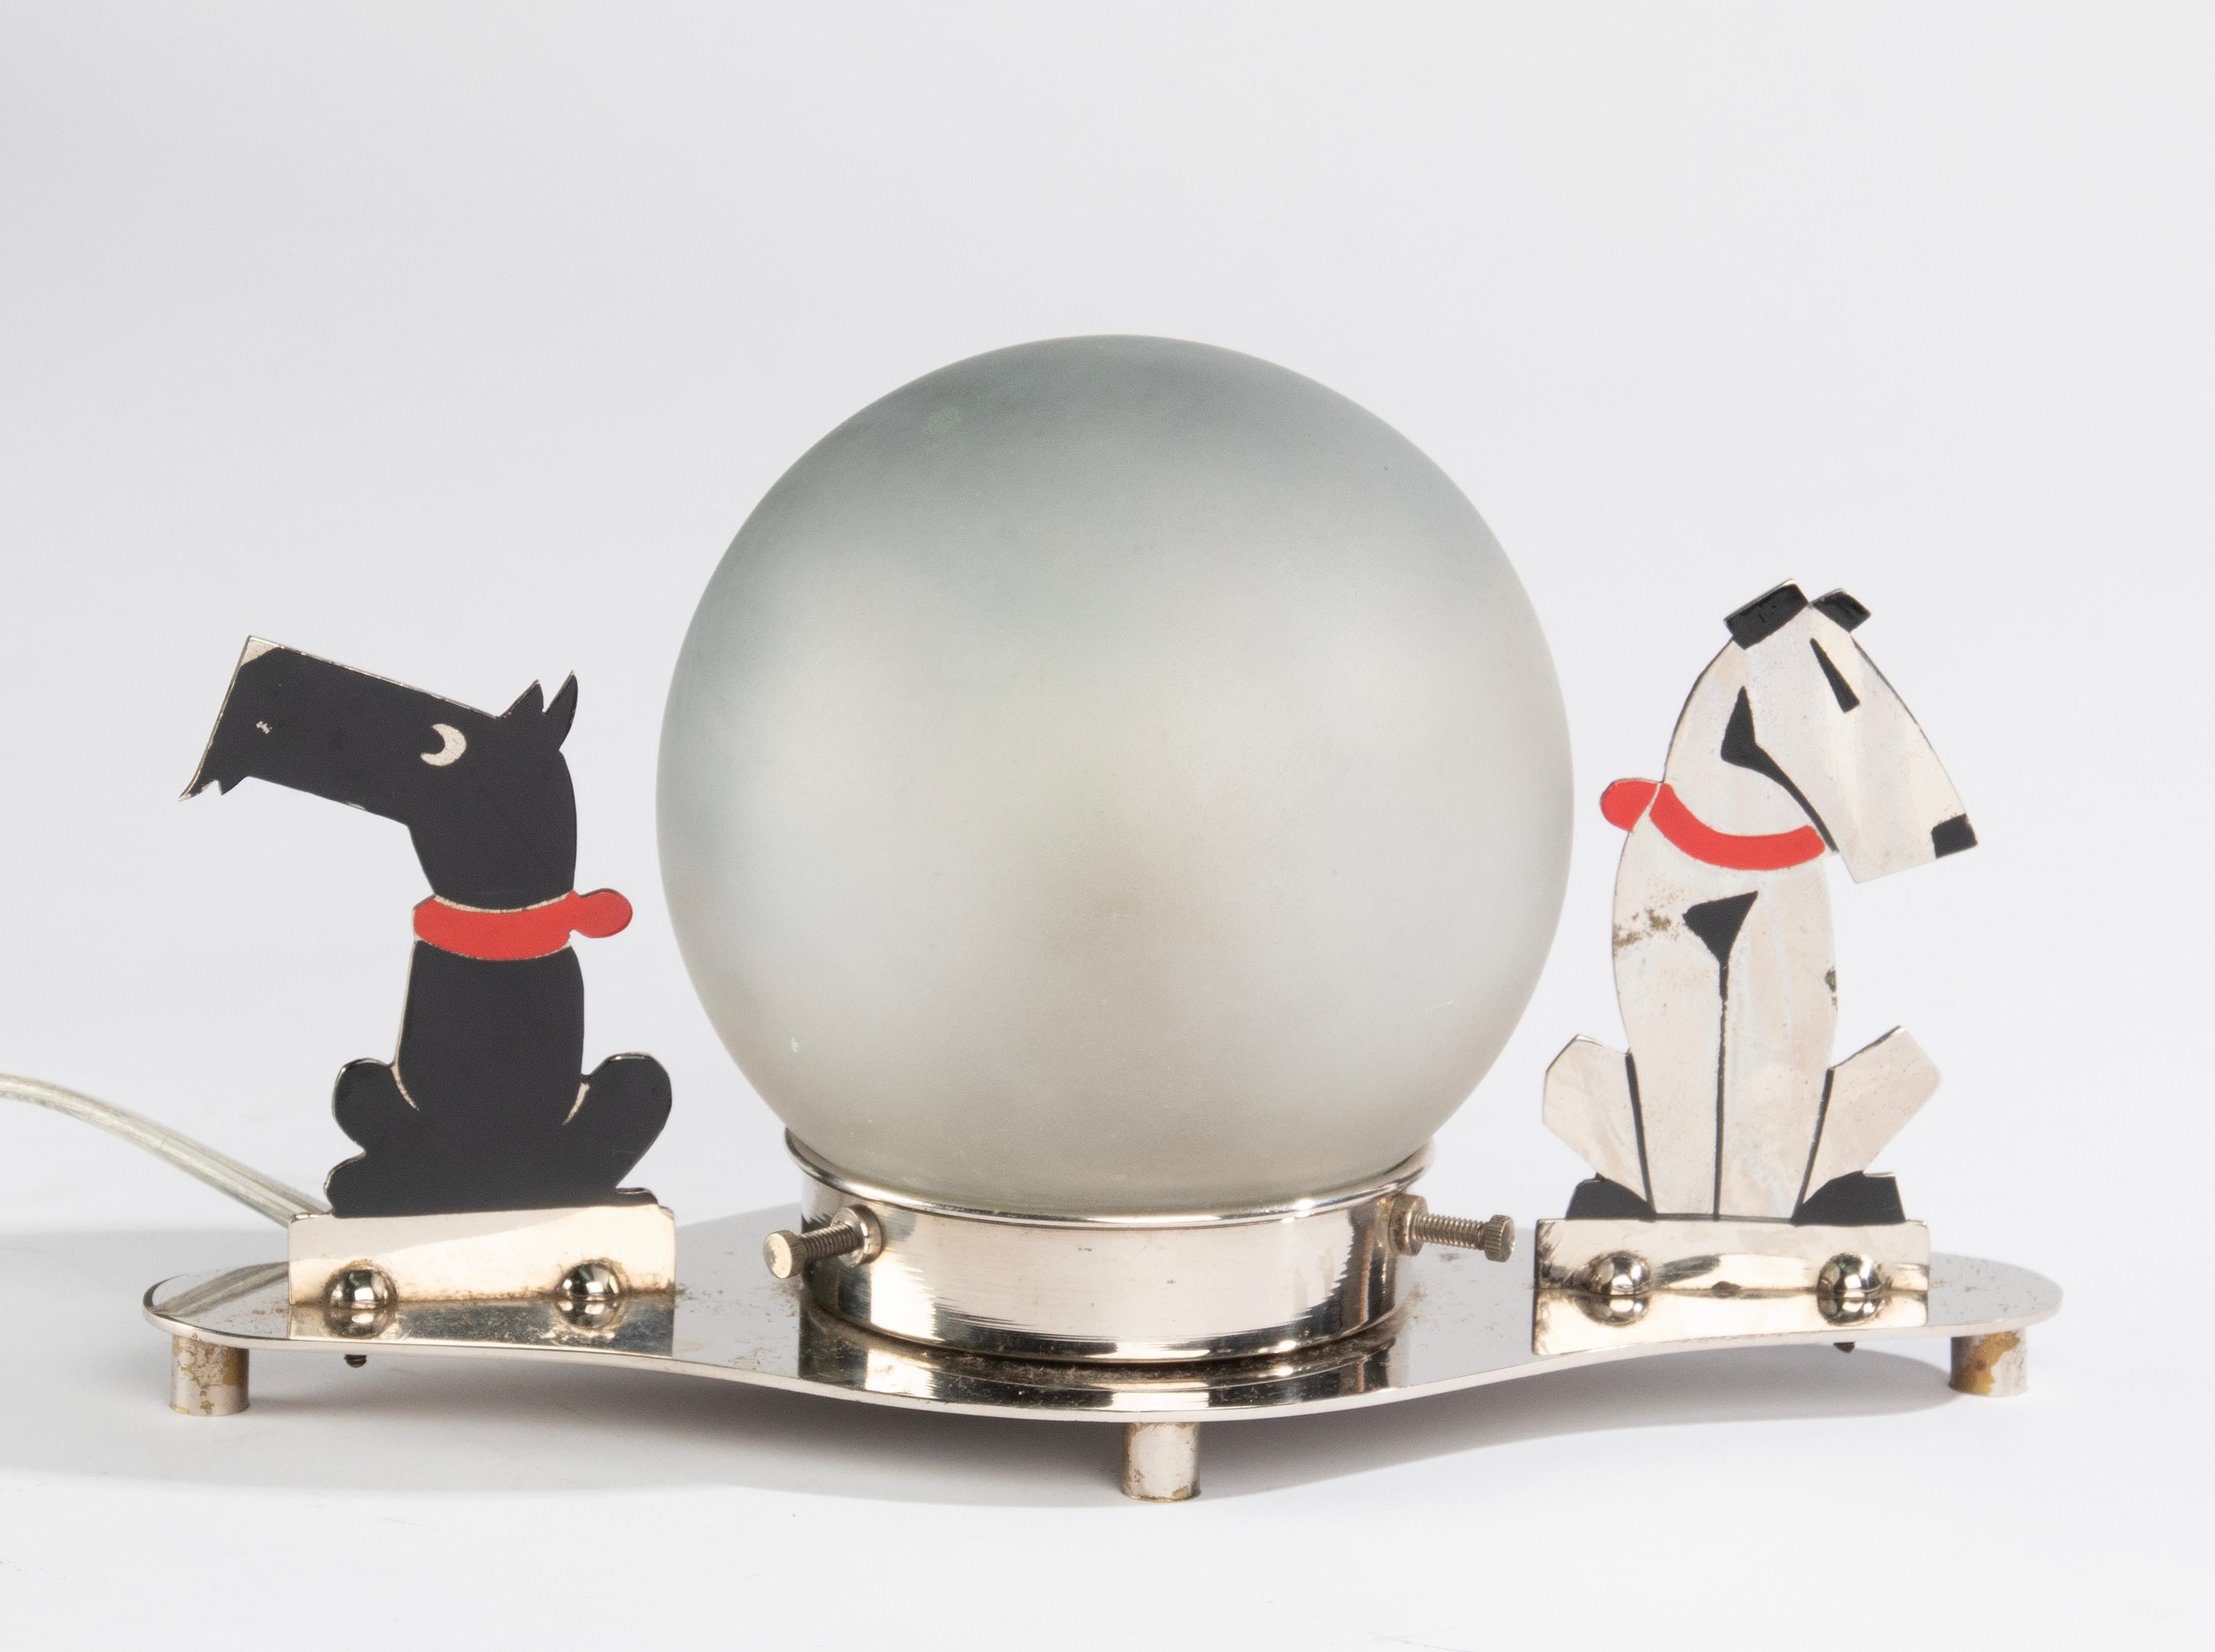 A lovely Art Deco table lamp, flanked by two dogs (black and white). 
Made of chrome plated metal. The lampshade is made of satined glass. 
The lamp is in good and working condition. Rewired, with switch and EU plug.
Dimensions: 25 x 12 cm and 15 cm